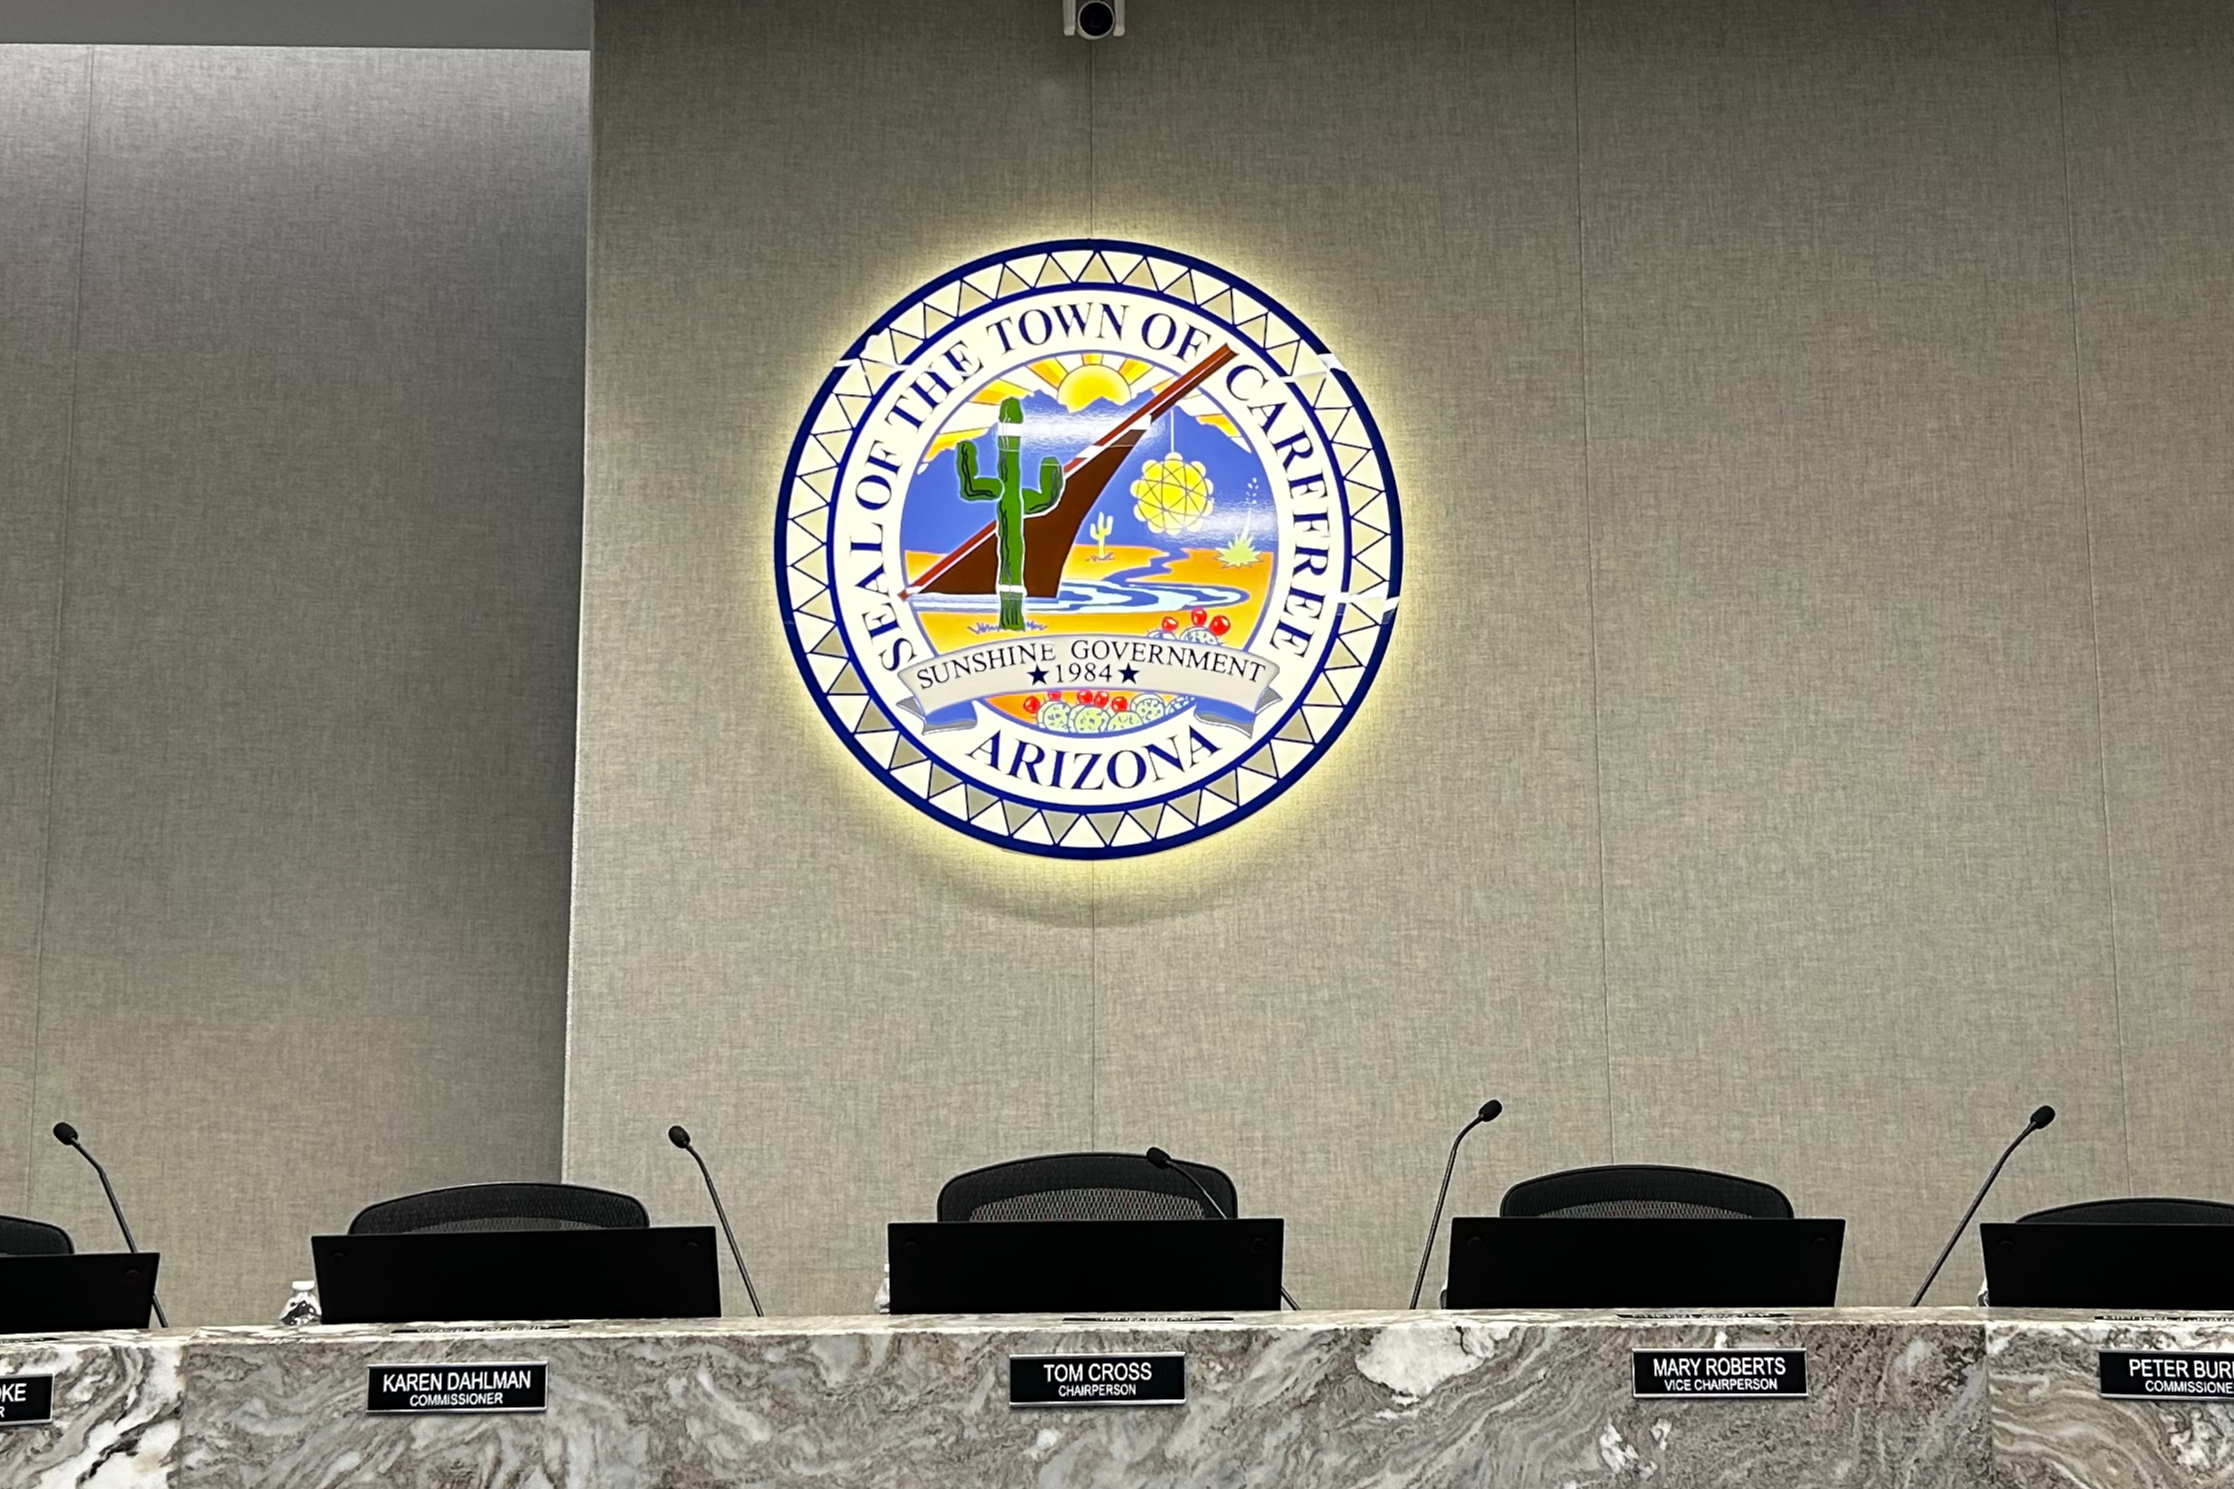 Picture of the illuminated Town Seal above the dais in the Council Chambers.